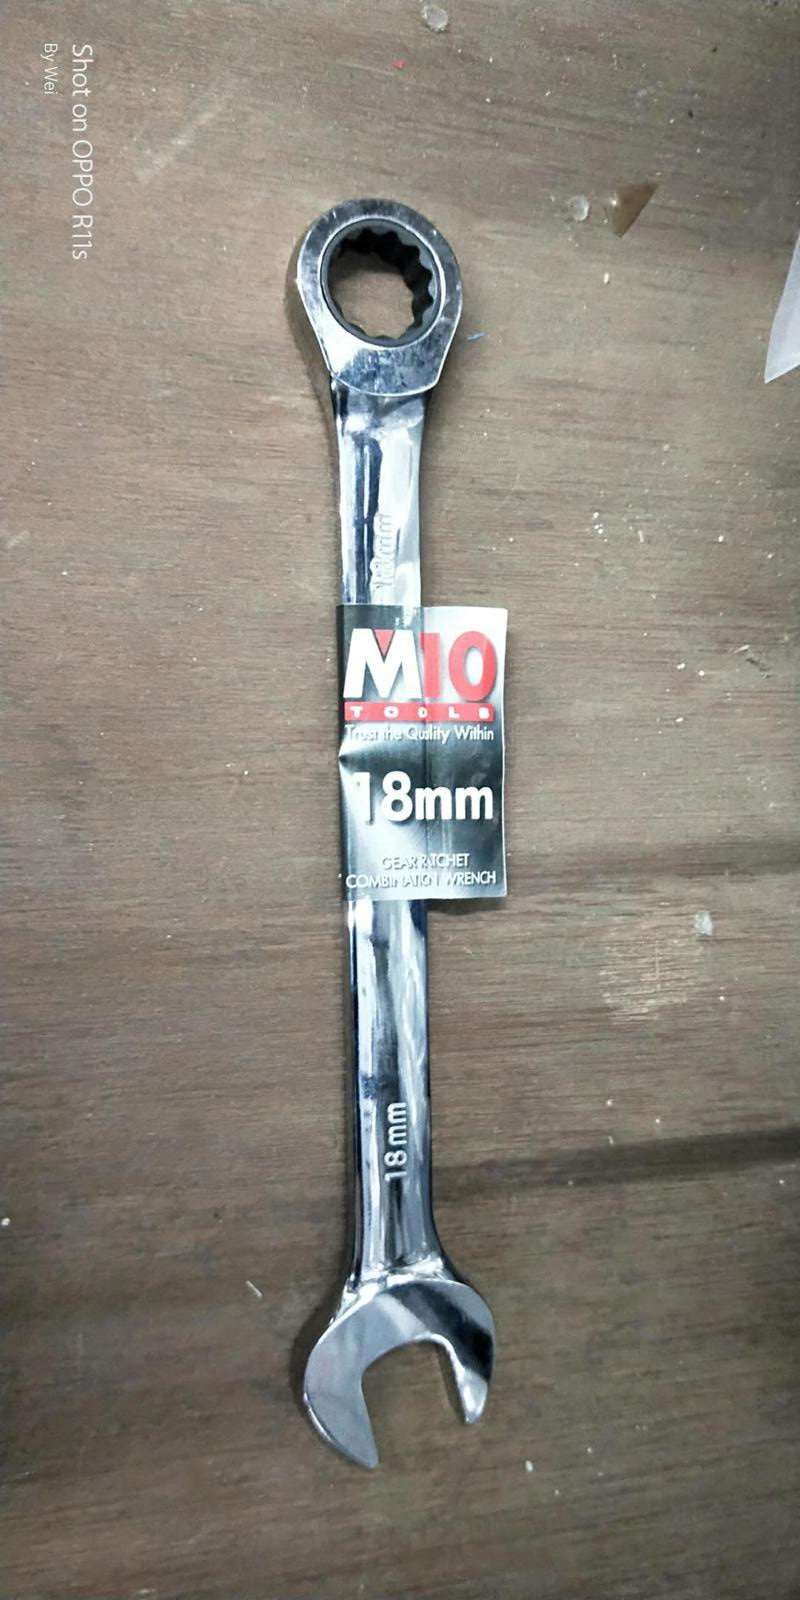 M10 Gear Ratchet Long Combination Wrench | Model : 005-053 | Size : 6mm - 32mm Ratchet Combination Wrench M10 